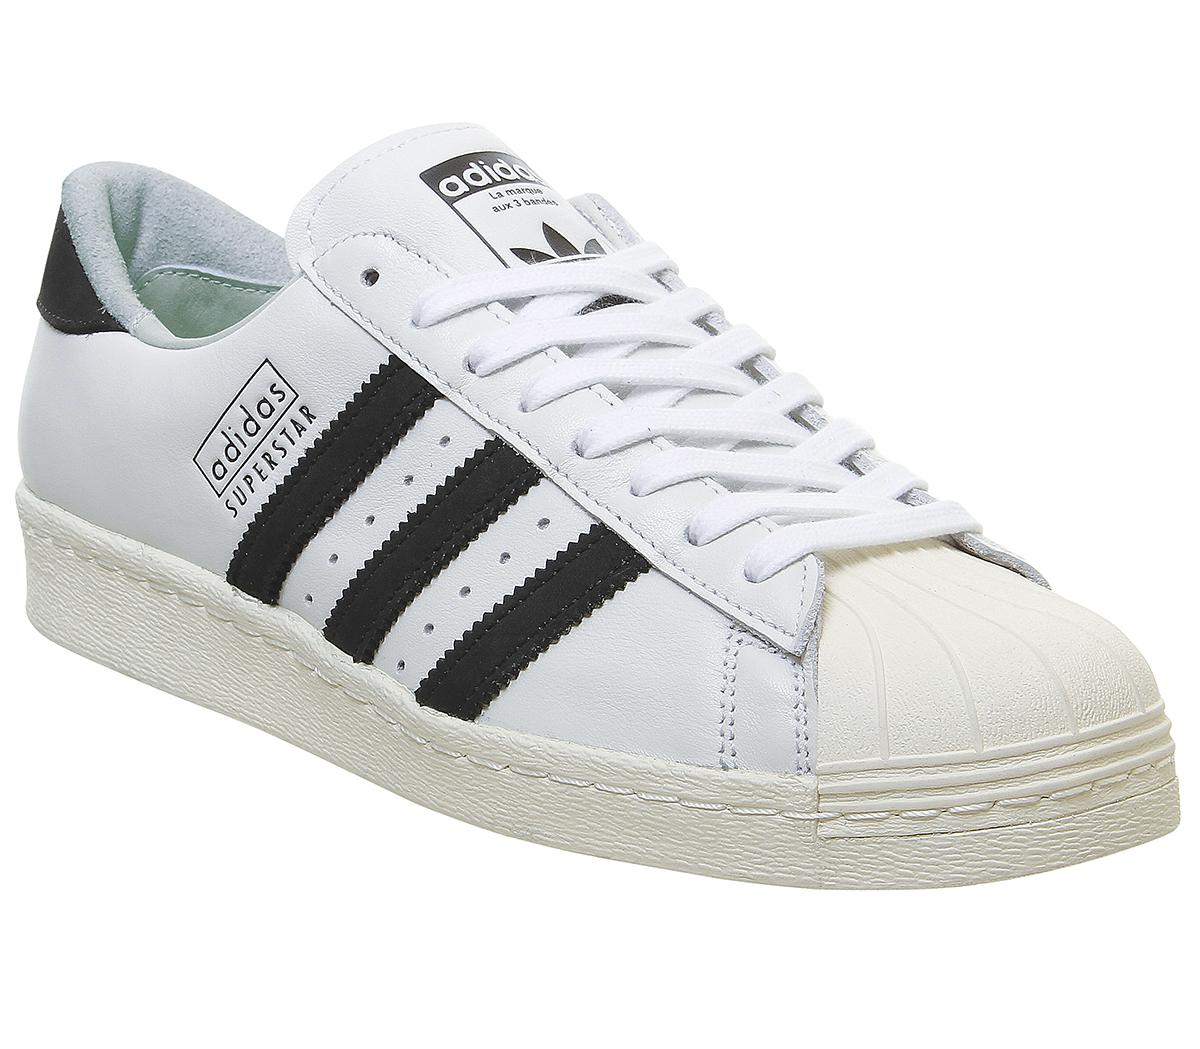 adidas superstar 80s trainers